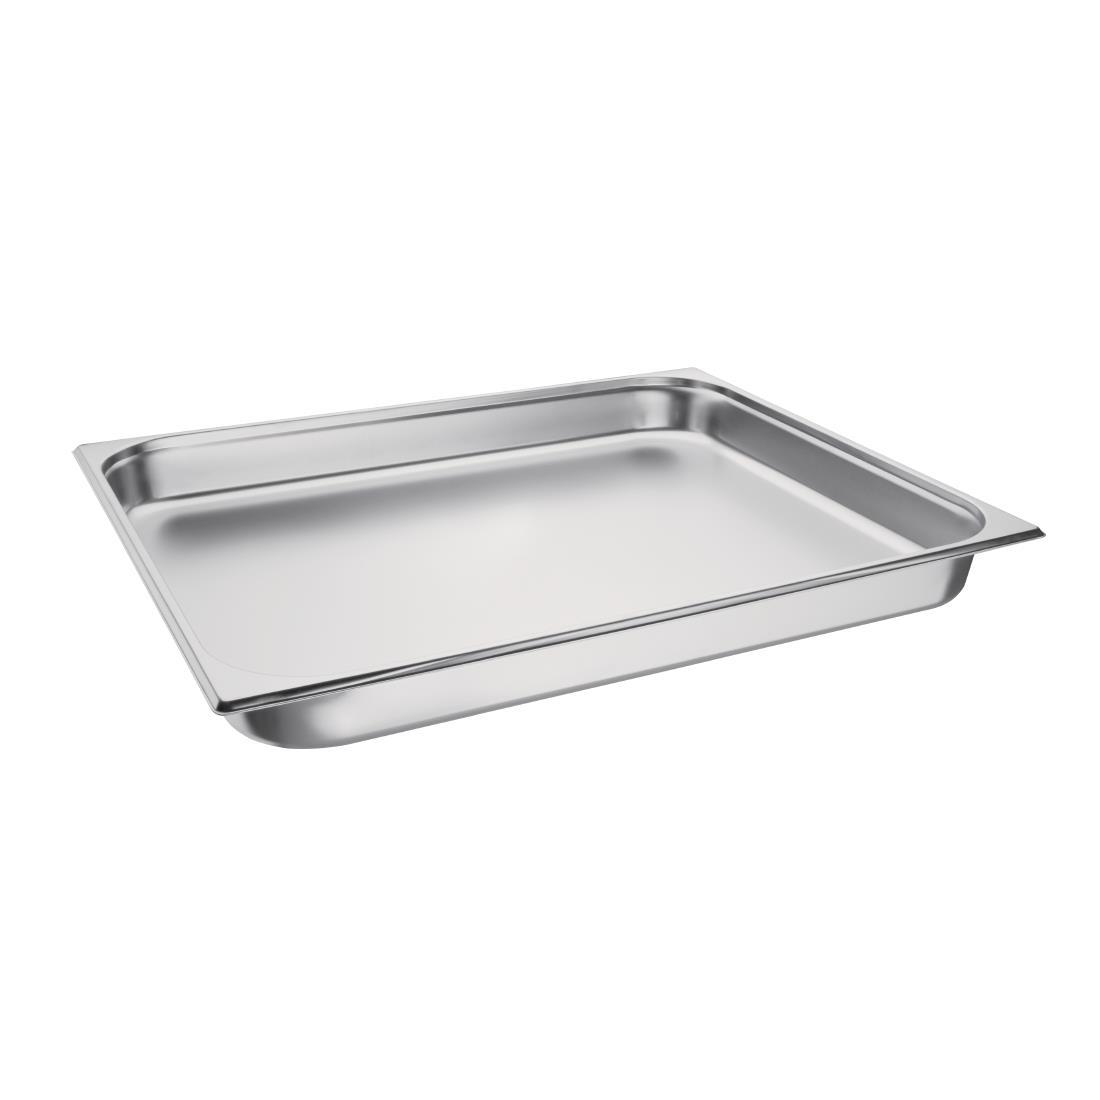 Vogue Stainless Steel 2/1 Gastronorm Pan 65mm - K802  - 1